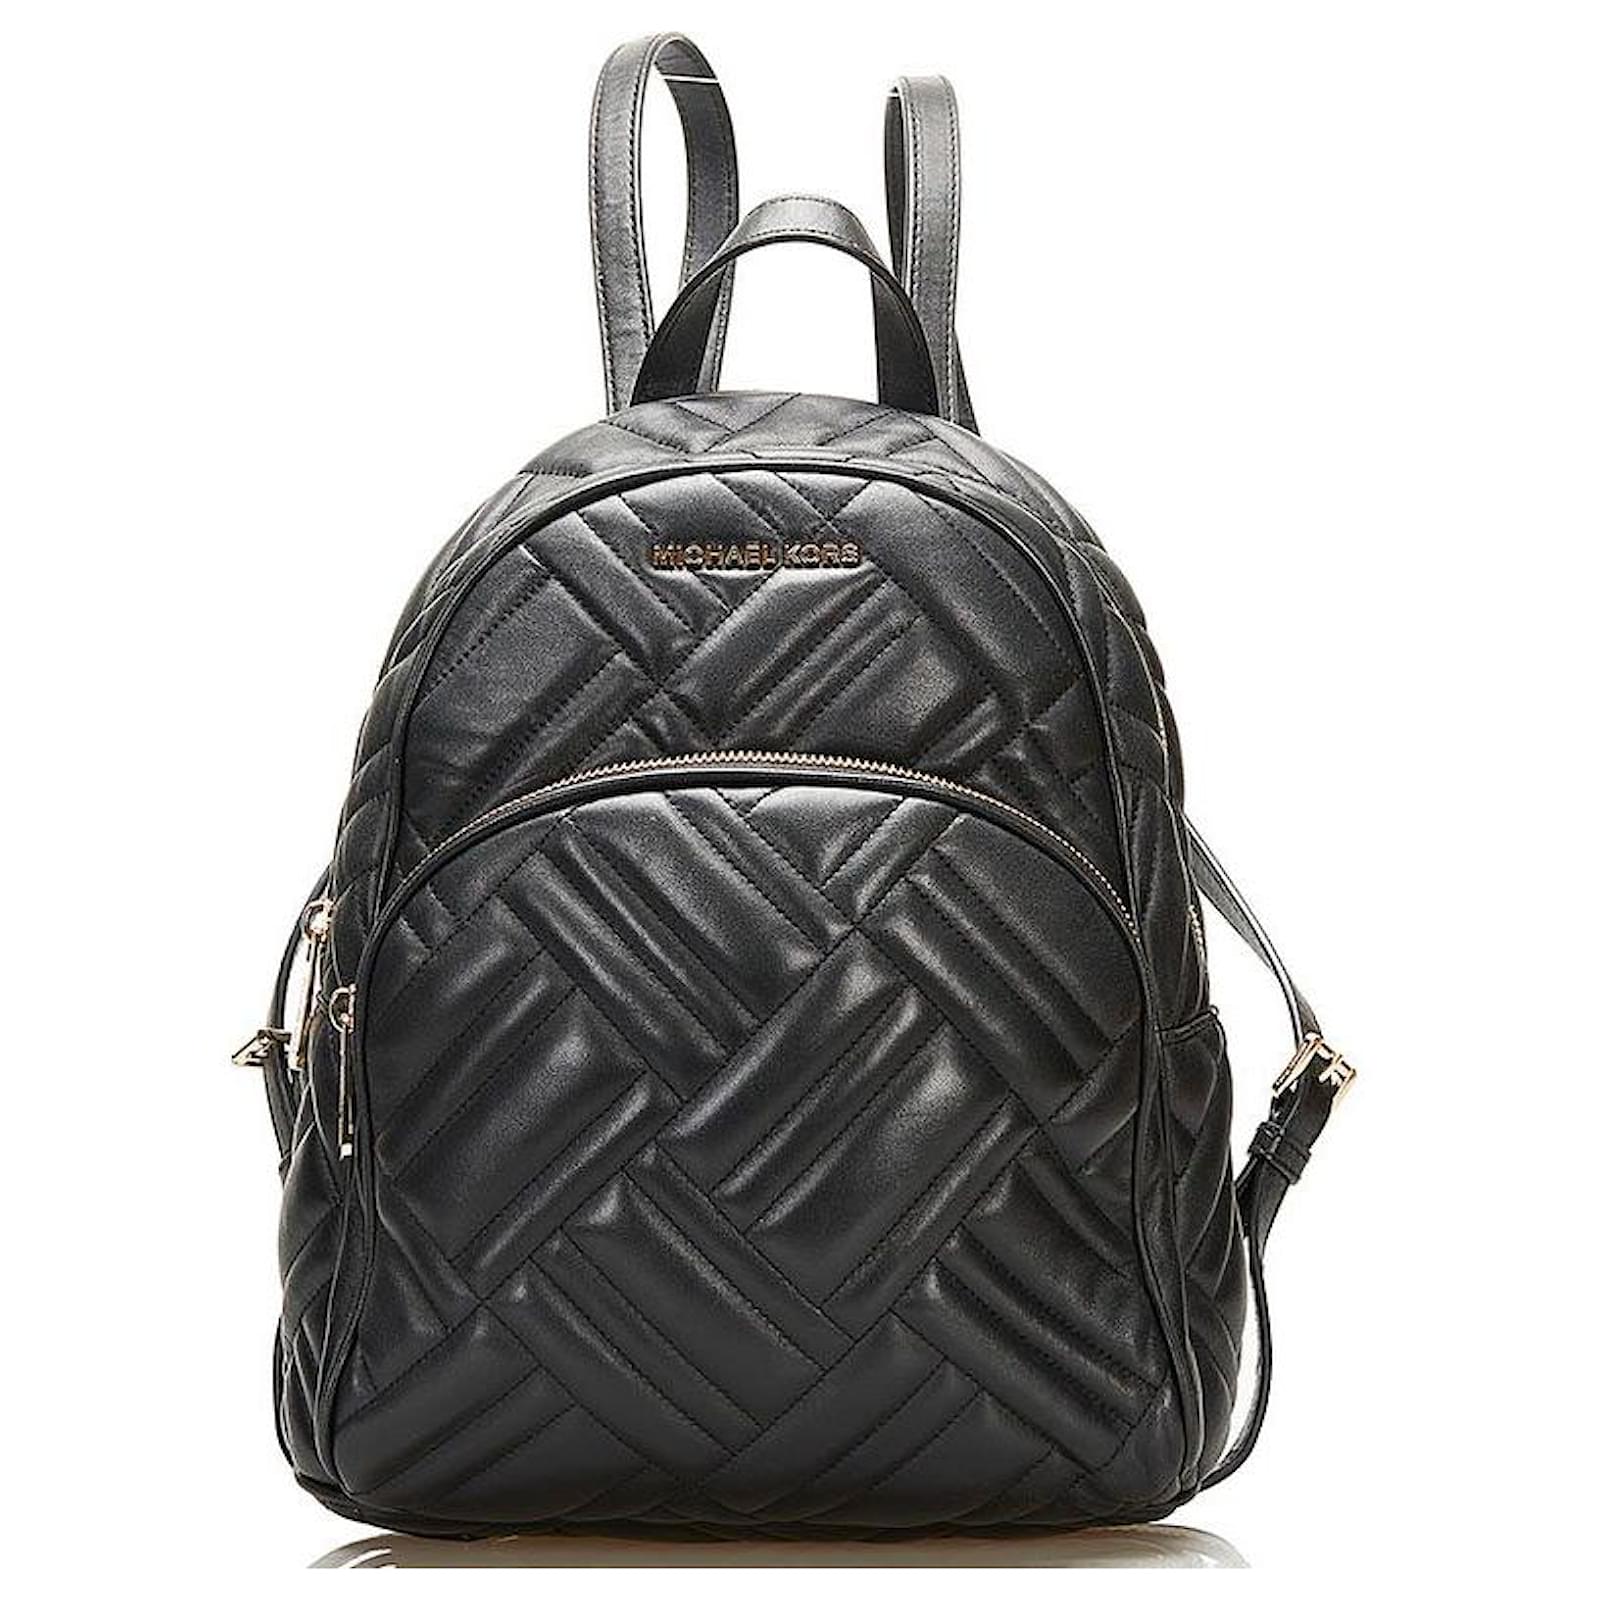 michael kors Quilted black Leather Pony-style calfskin - Closet